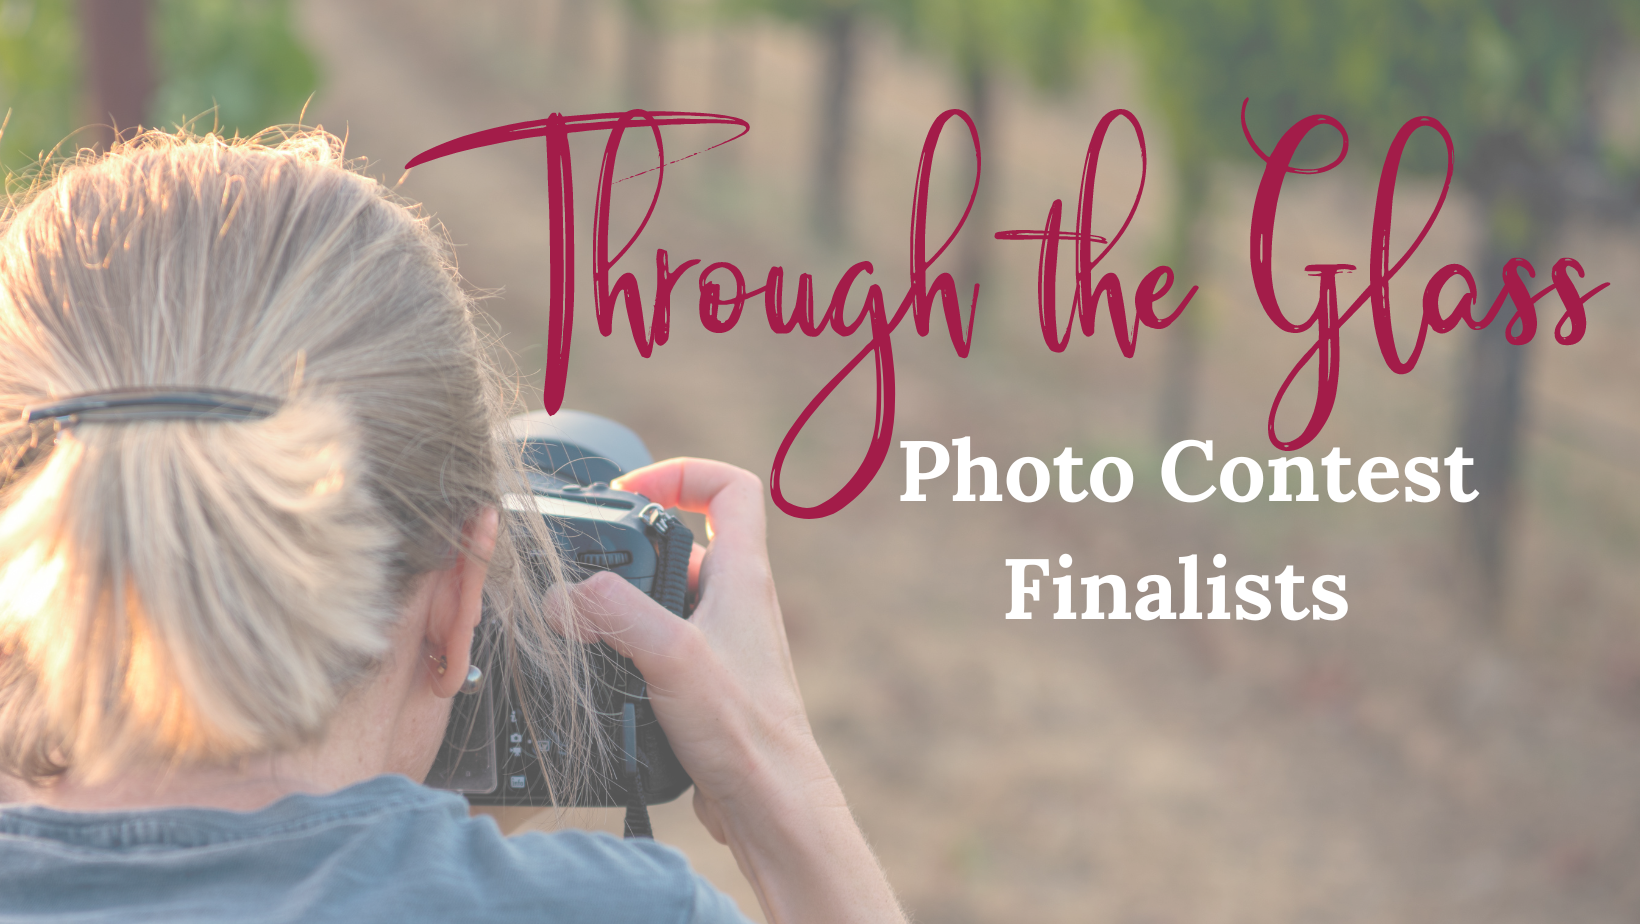 Through the Glass: Photo Contest Finalists